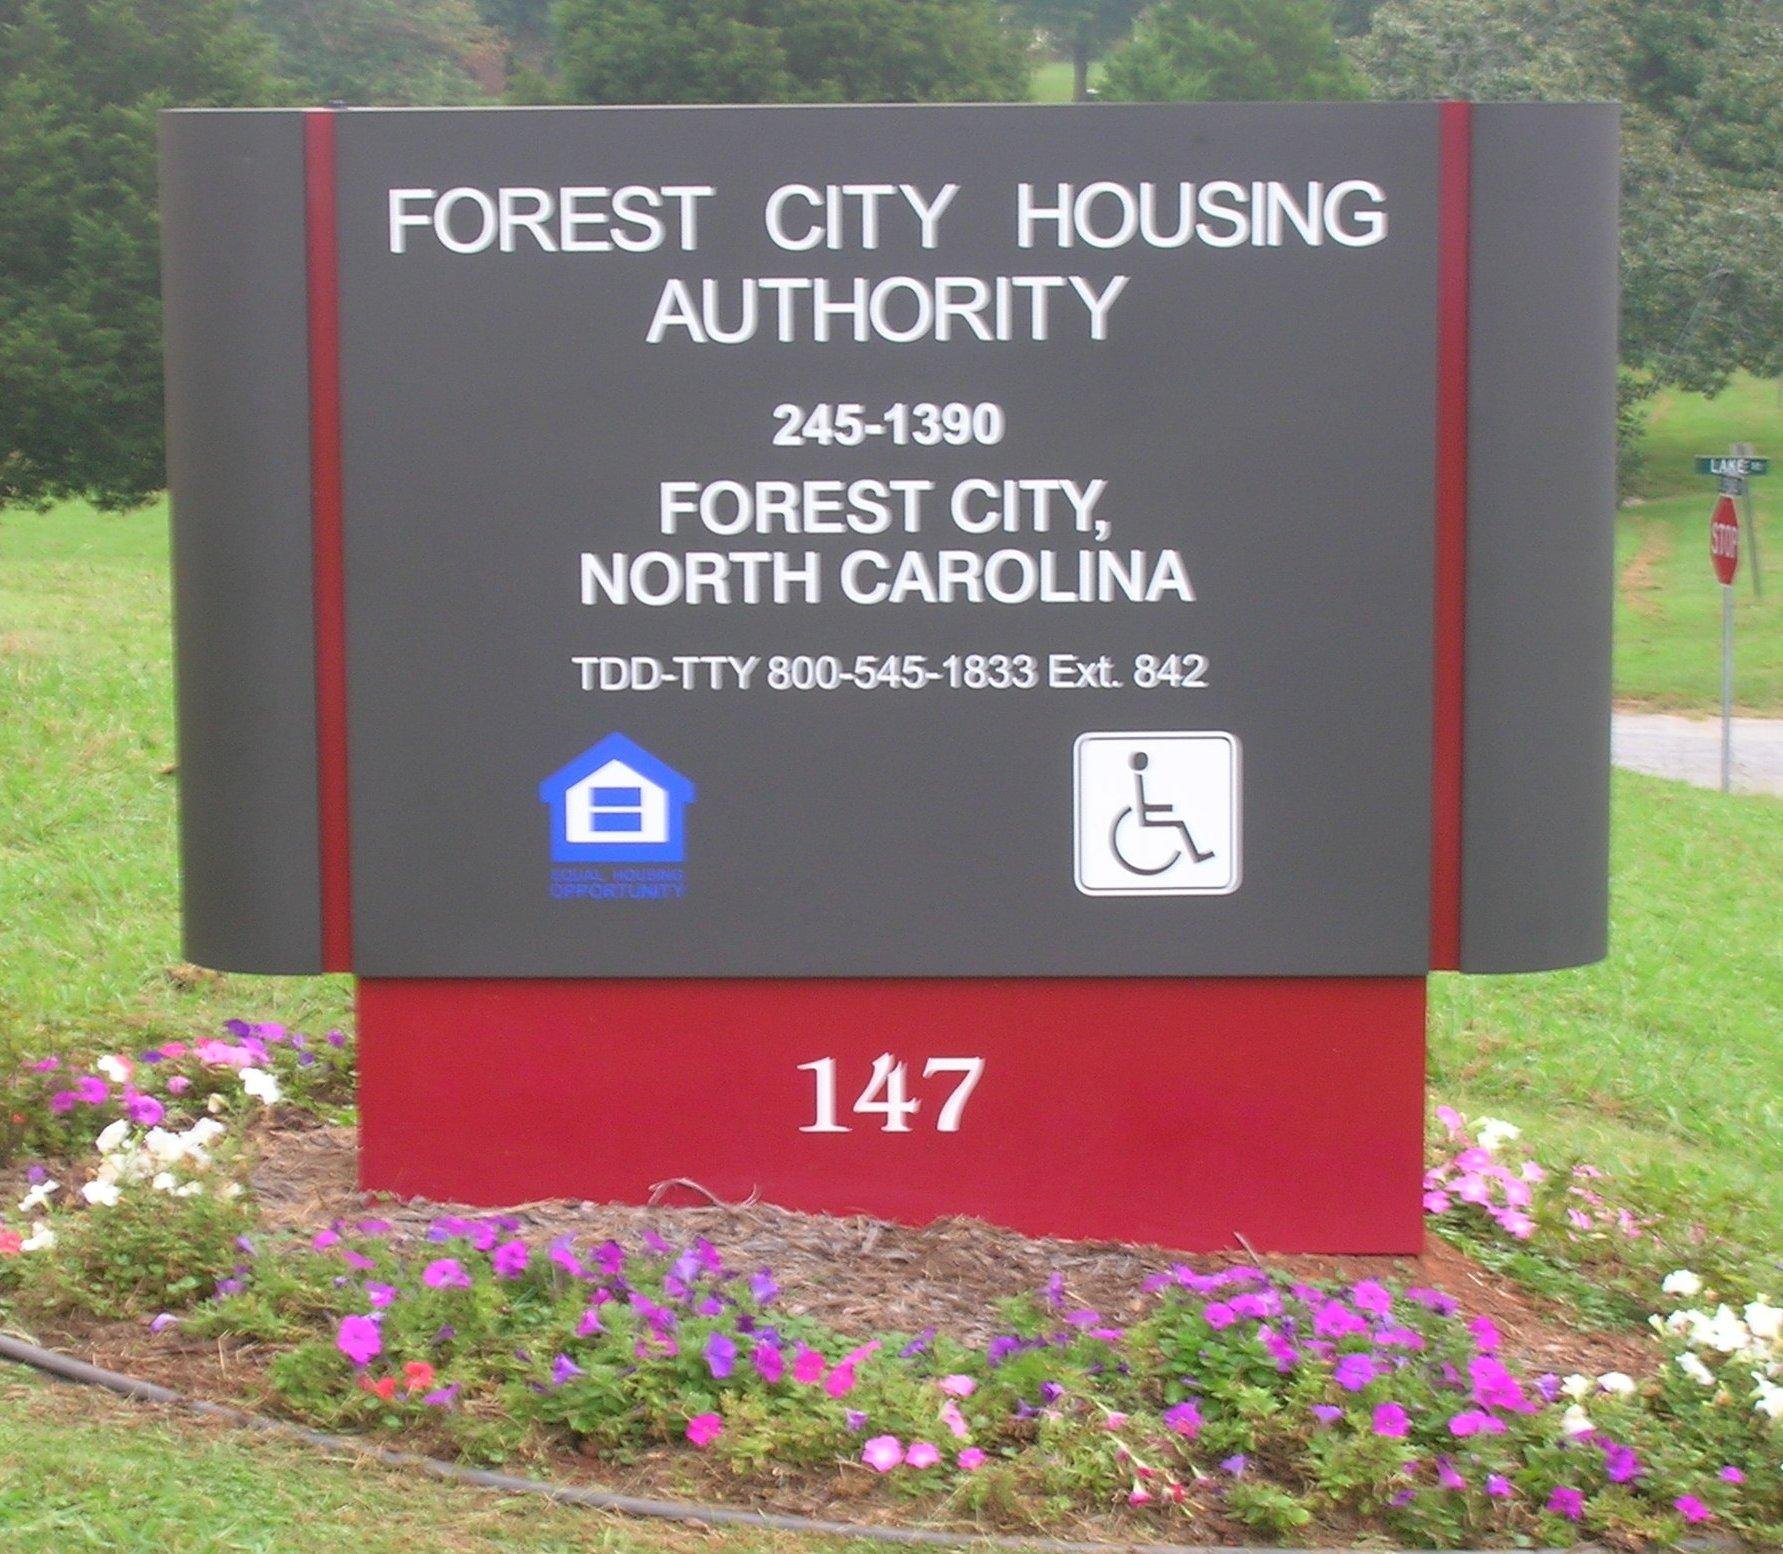 Forest City Housing Authority